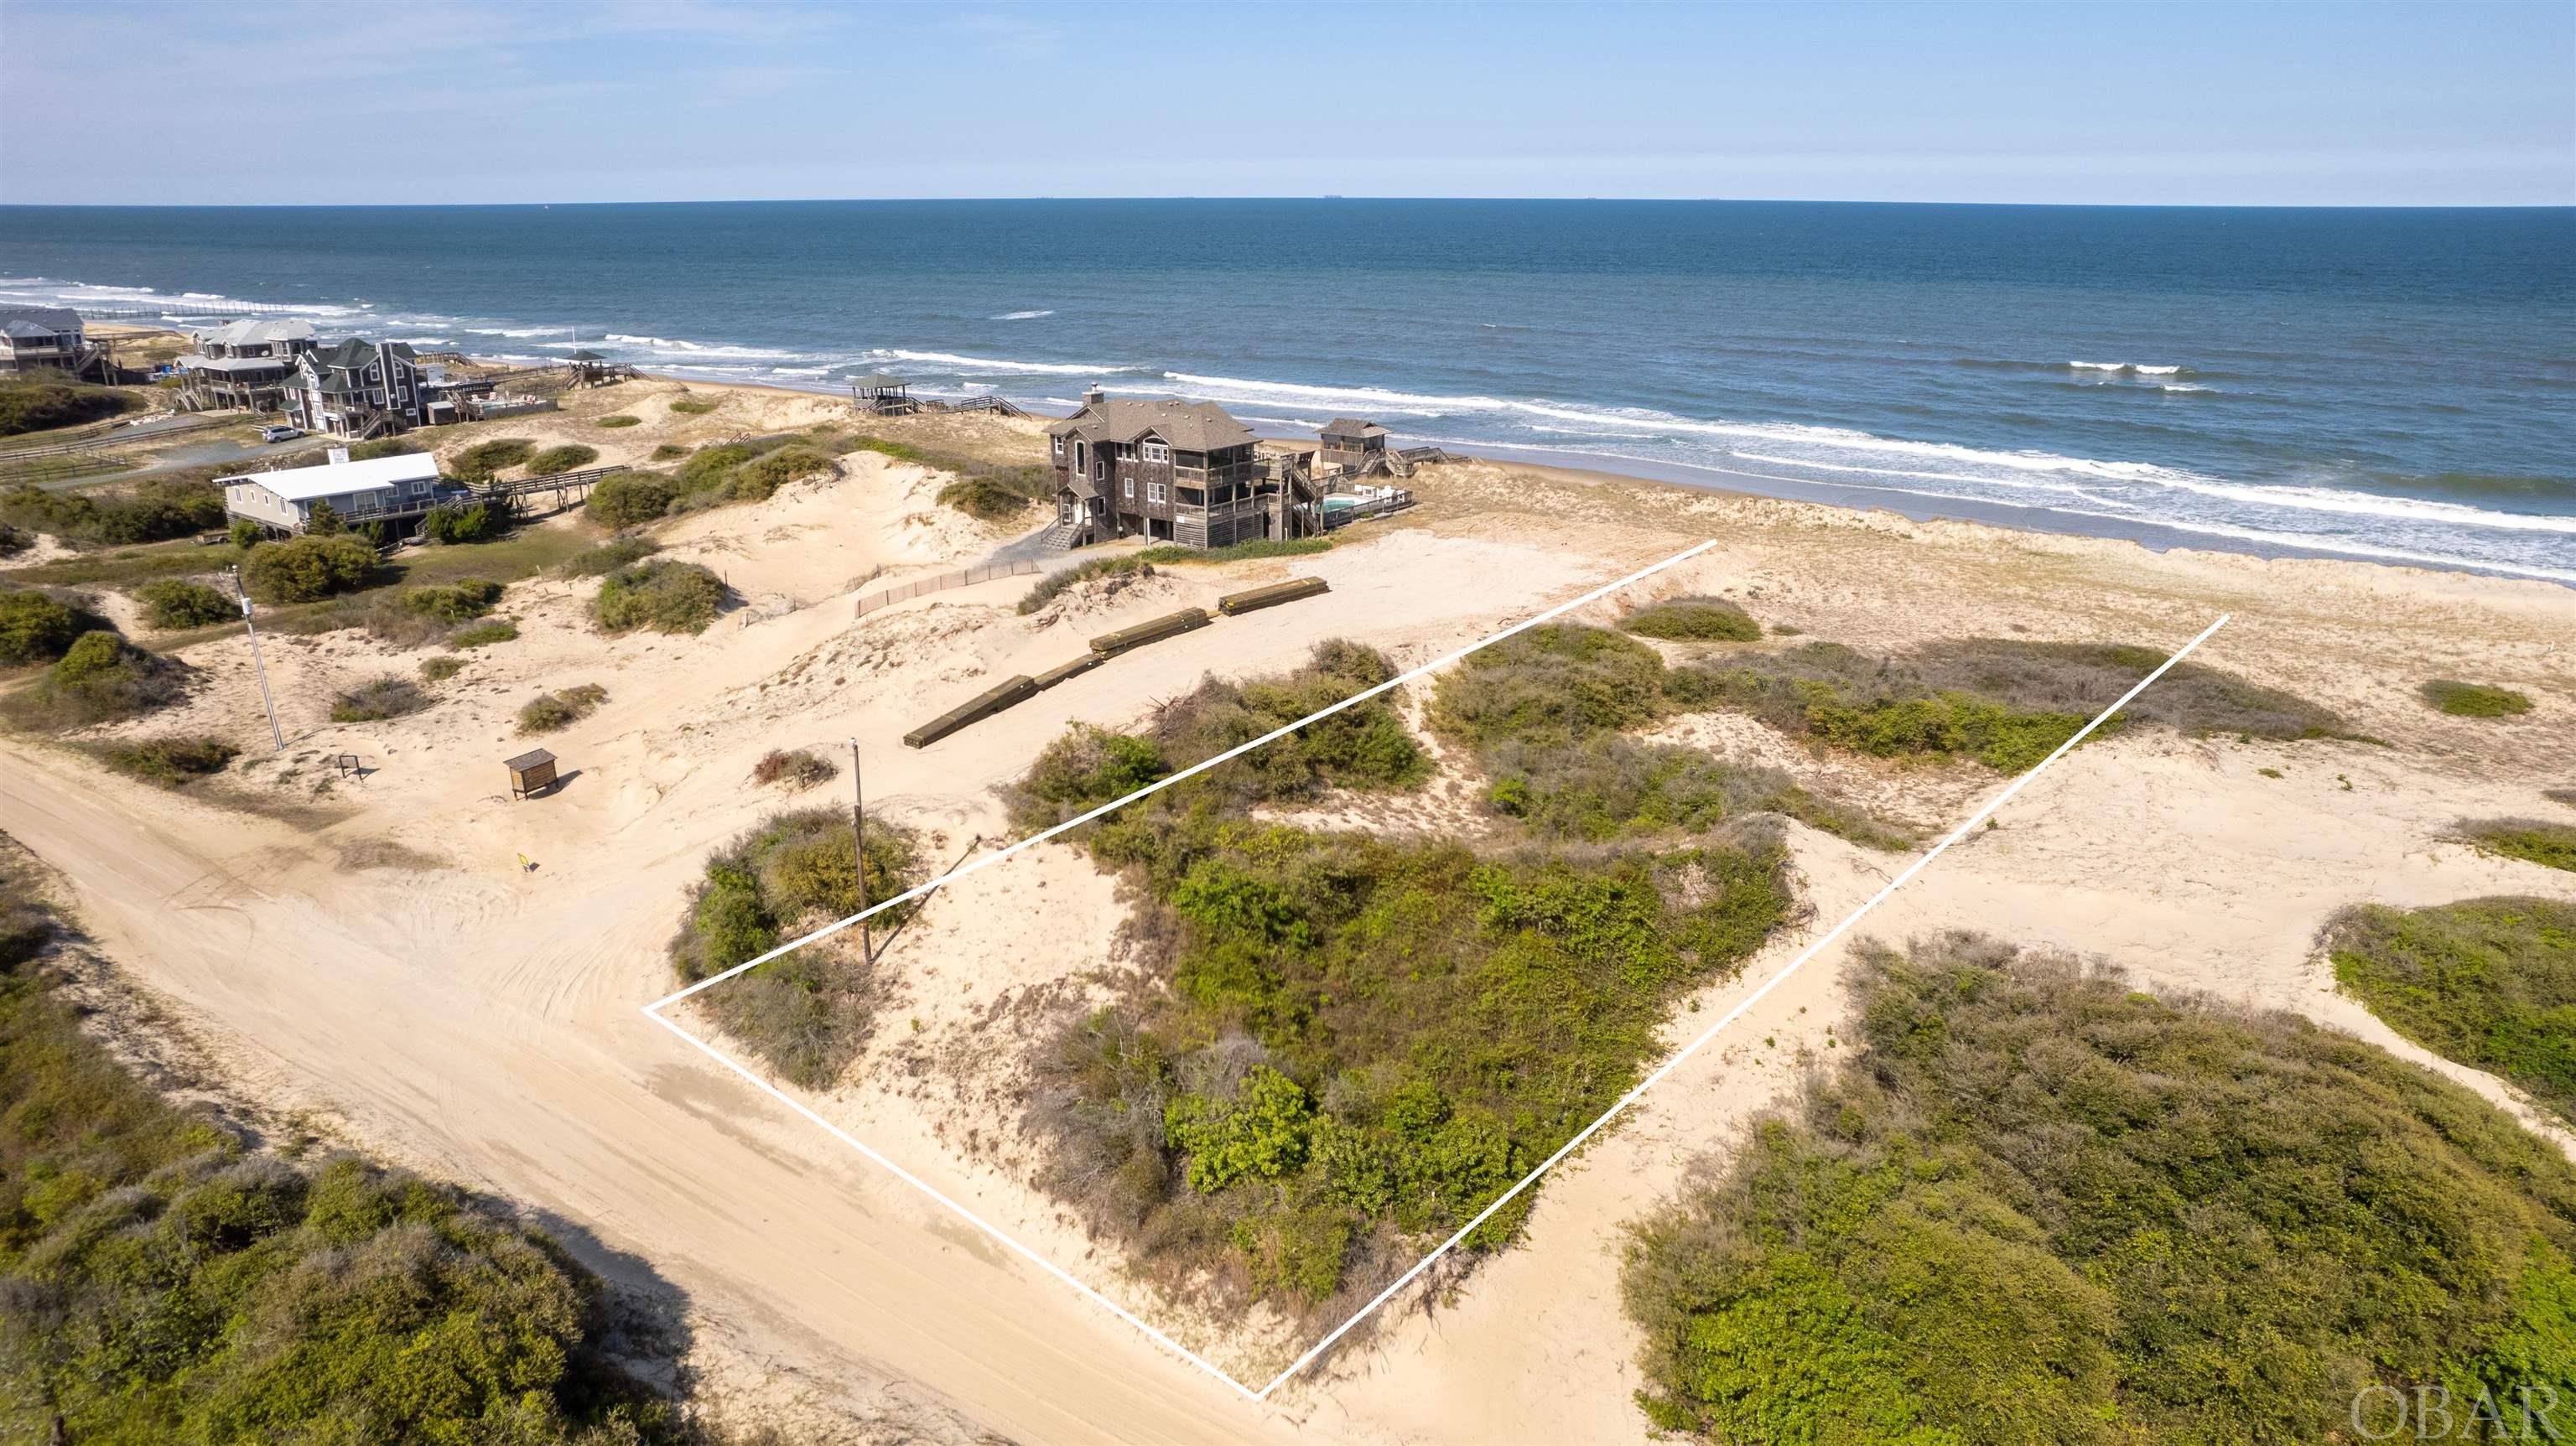 This is a must see Oceanfront property as this kind do not come on the market often. X flood zone throughout the entire buildable footprint.  HUGE elevation throughout the lot starting at the road to the primary dune which will afford a future home the extremely rare duality of sweeping ocean views AND elevated protection. The entire lot is well vegetated which stabilizes the sand in place preventing wind-driven erosion. There are only a handful of lots in Carova Beach that offer this kind of height, protection, and X flood zone. This lot would be an enviable location for a second home or a highly sought after and successful vacation rental.  Survey and soil report already completed and on file